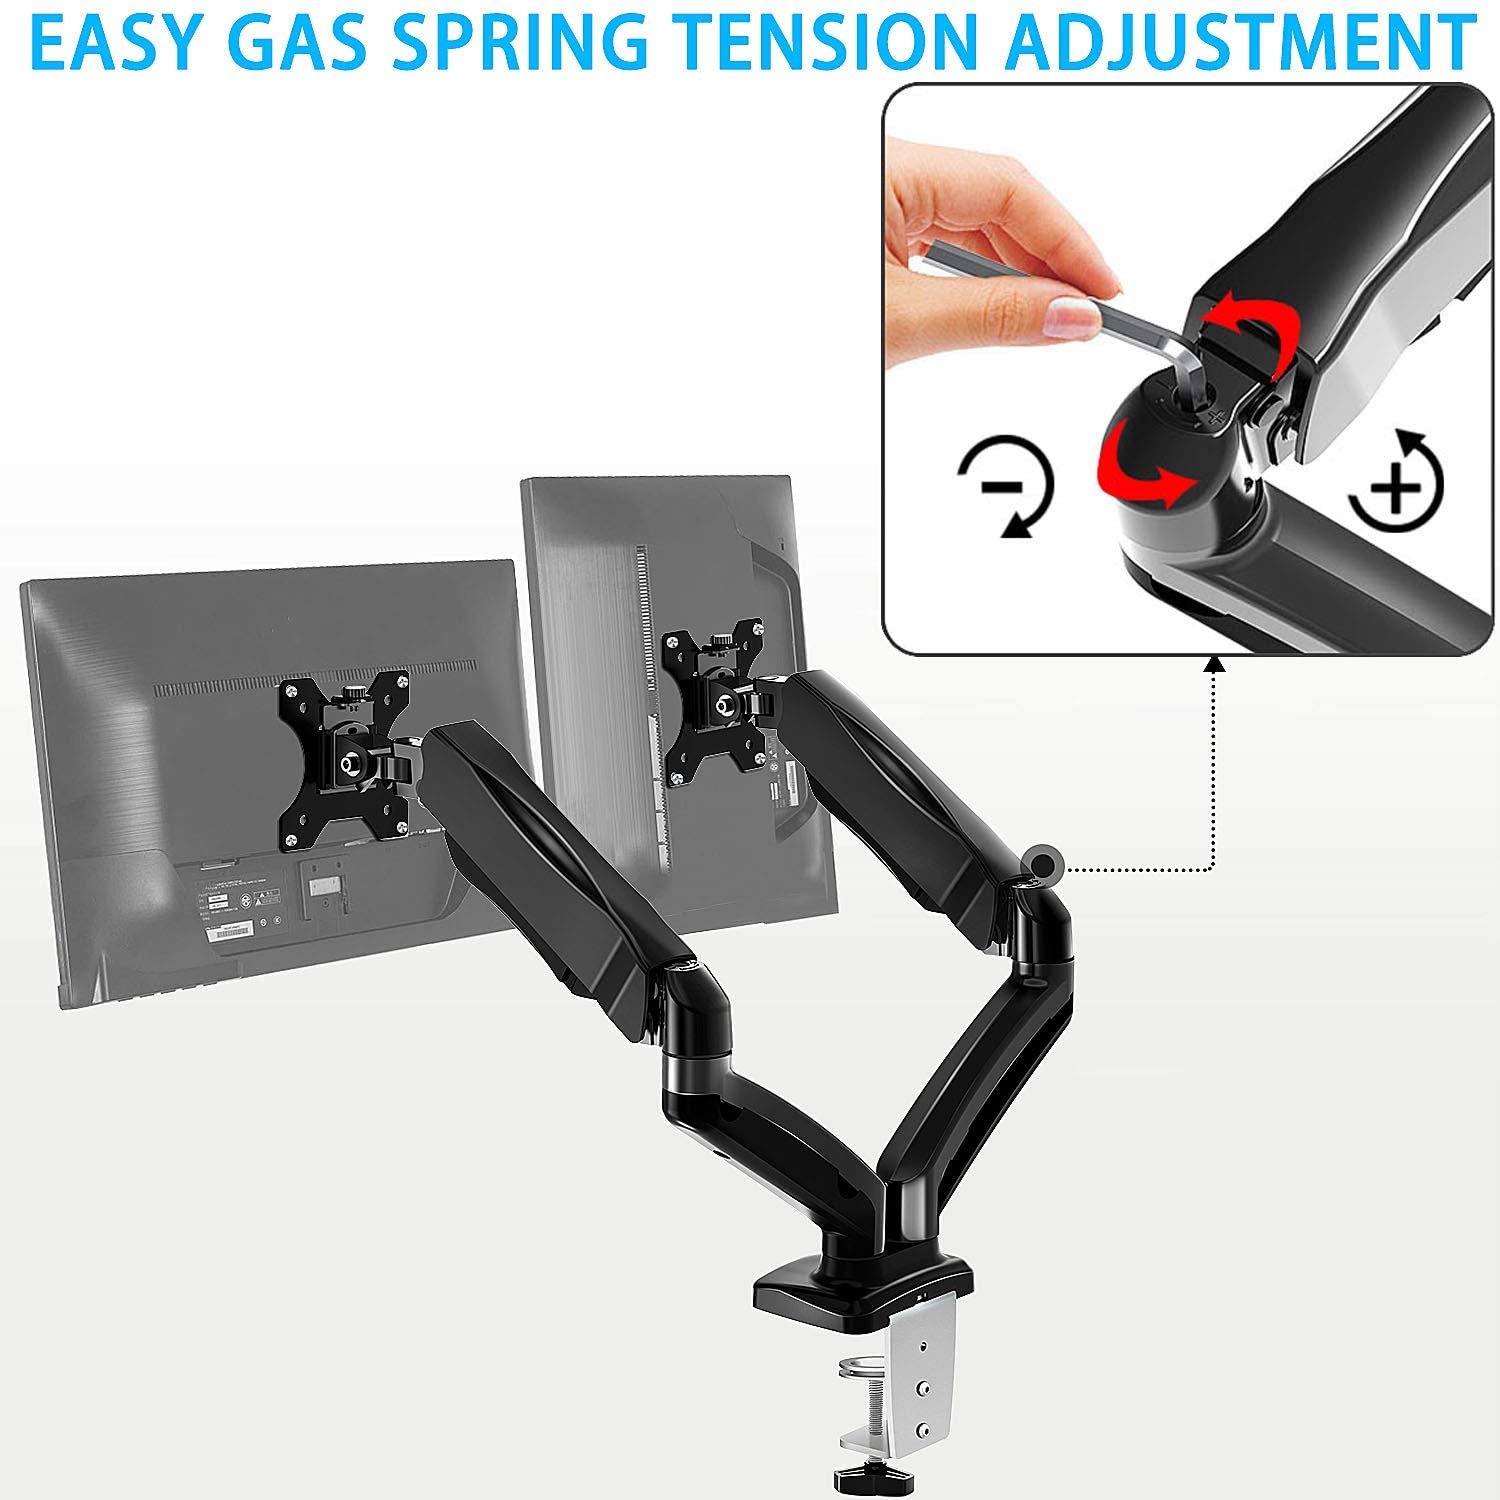 Dual Arms monitor desk arm mount with easy adjustment powered by gas spring